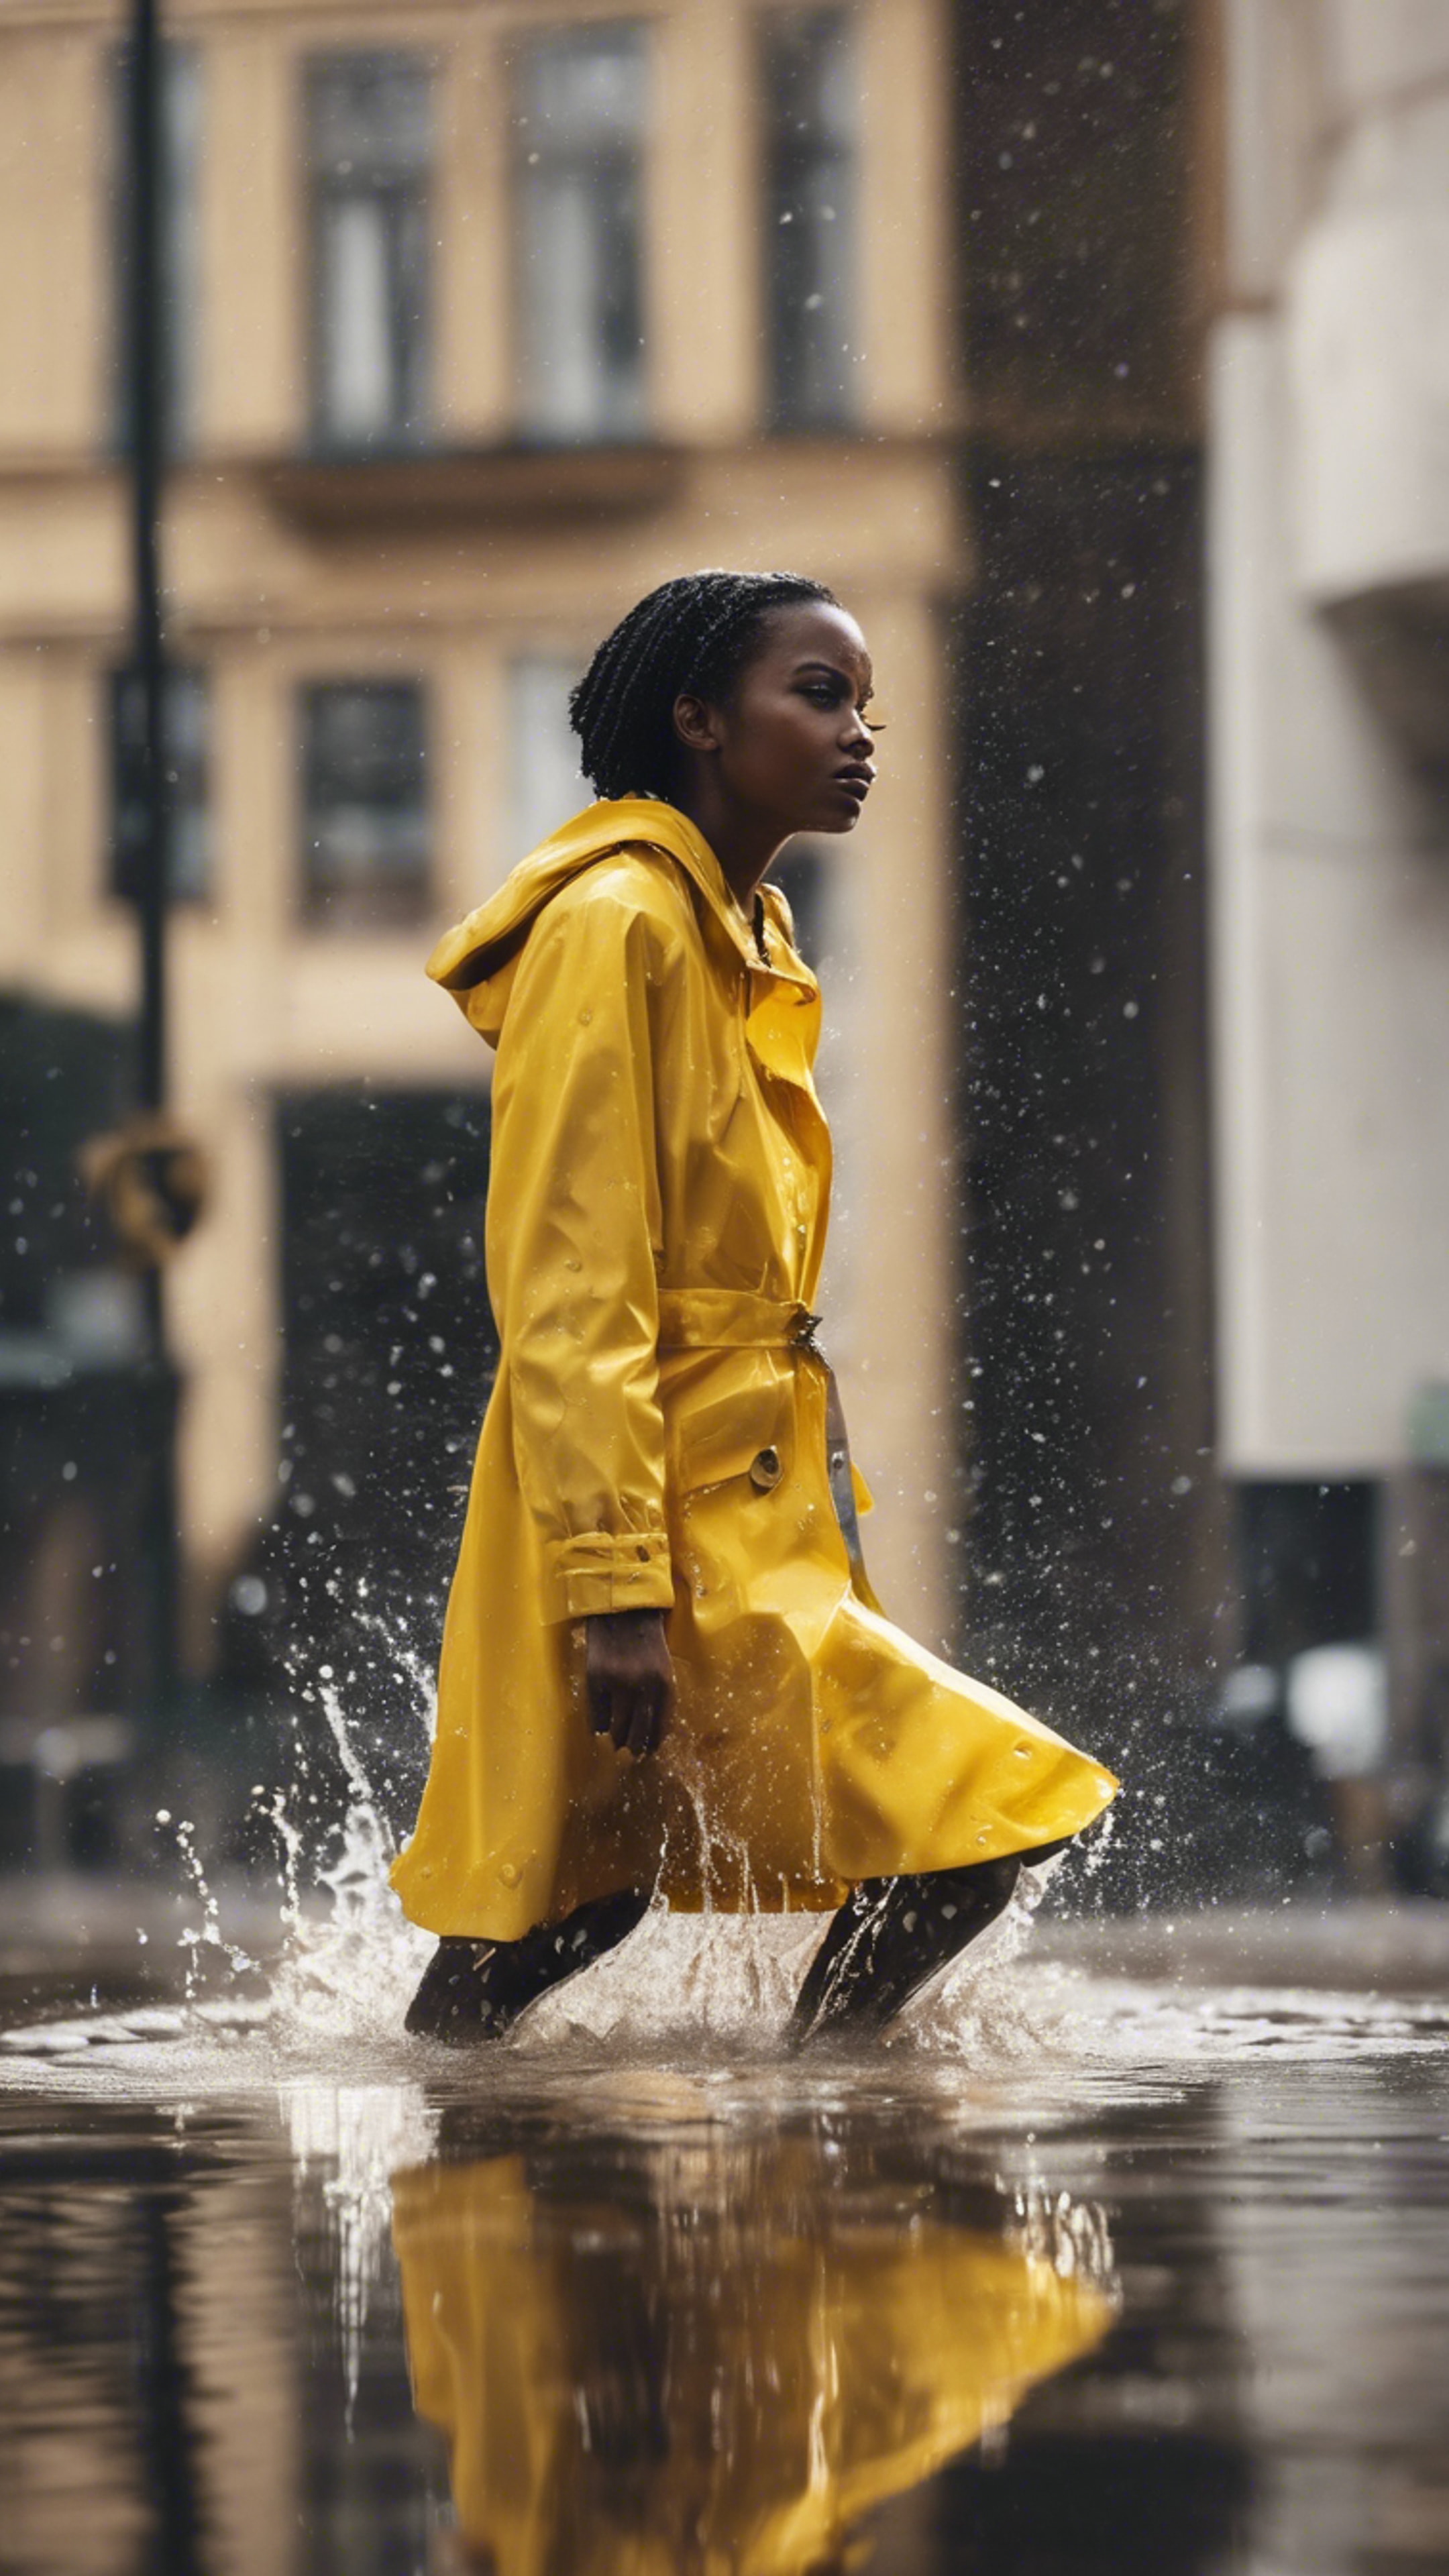 A black girl in a bright yellow raincoat splashing water in puddles after a heavy rain. Ταπετσαρία[a80398e4c066404db875]